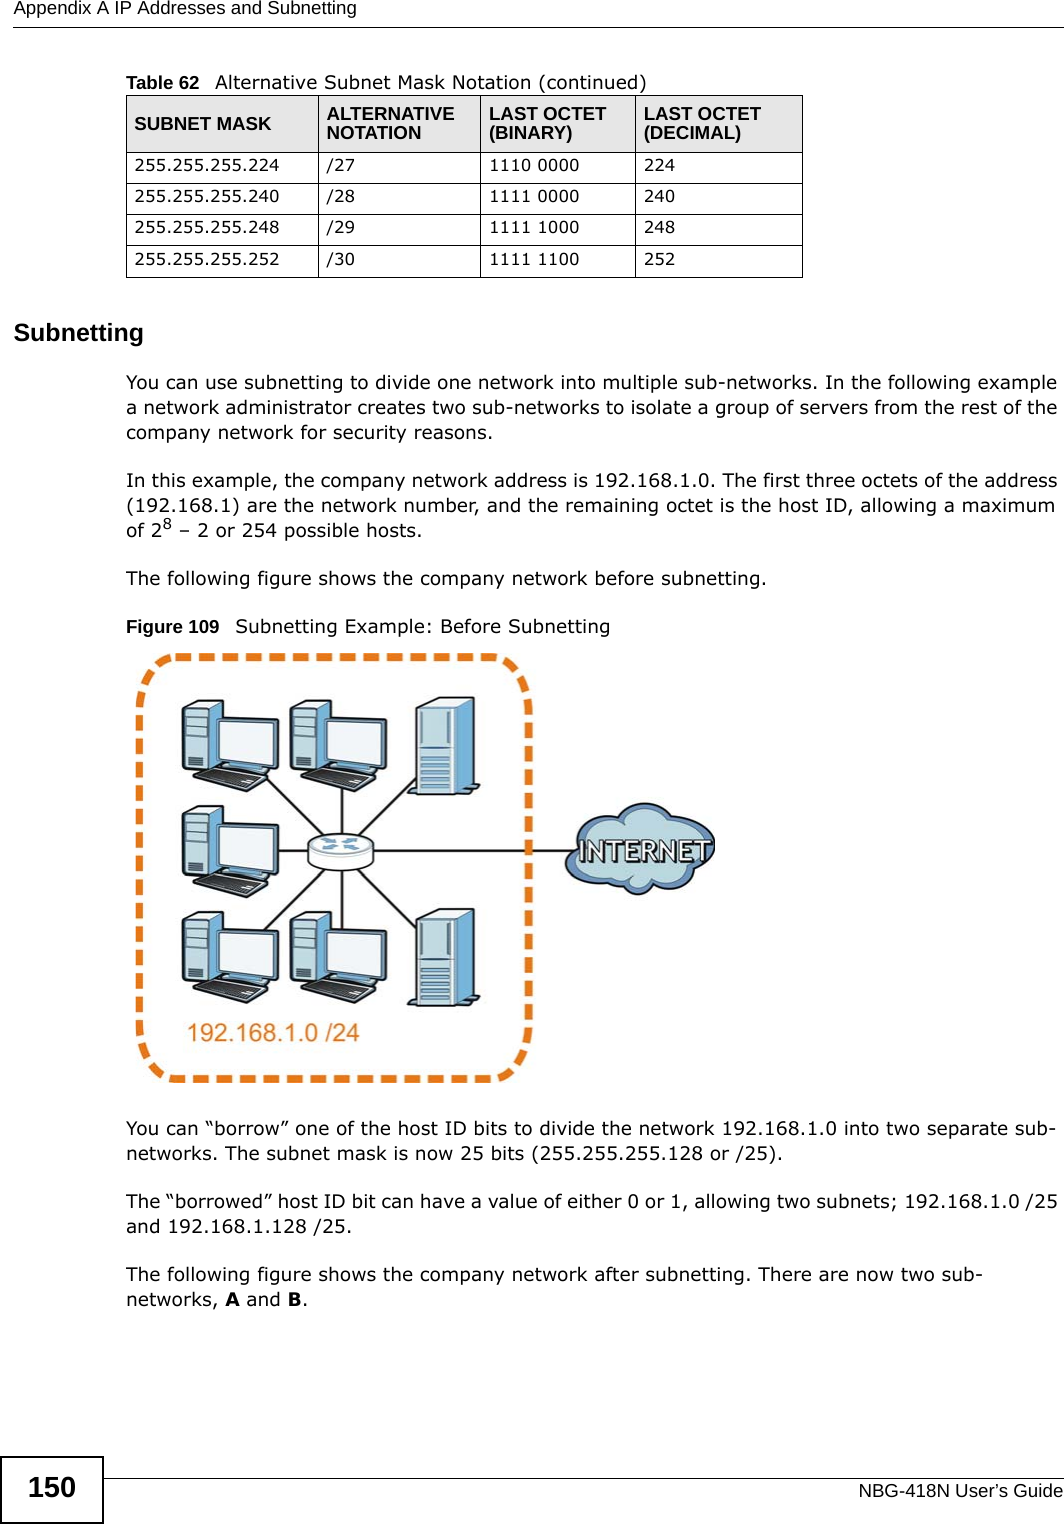 Appendix A IP Addresses and SubnettingNBG-418N User’s Guide150SubnettingYou can use subnetting to divide one network into multiple sub-networks. In the following example a network administrator creates two sub-networks to isolate a group of servers from the rest of the company network for security reasons.In this example, the company network address is 192.168.1.0. The first three octets of the address (192.168.1) are the network number, and the remaining octet is the host ID, allowing a maximum of 28 – 2 or 254 possible hosts.The following figure shows the company network before subnetting.  Figure 109   Subnetting Example: Before SubnettingYou can “borrow” one of the host ID bits to divide the network 192.168.1.0 into two separate sub-networks. The subnet mask is now 25 bits (255.255.255.128 or /25).The “borrowed” host ID bit can have a value of either 0 or 1, allowing two subnets; 192.168.1.0 /25 and 192.168.1.128 /25. The following figure shows the company network after subnetting. There are now two sub-networks, A and B. 255.255.255.224 /27 1110 0000 224255.255.255.240 /28 1111 0000 240255.255.255.248 /29 1111 1000 248255.255.255.252 /30 1111 1100 252Table 62   Alternative Subnet Mask Notation (continued)SUBNET MASK ALTERNATIVE NOTATION LAST OCTET (BINARY) LAST OCTET (DECIMAL)